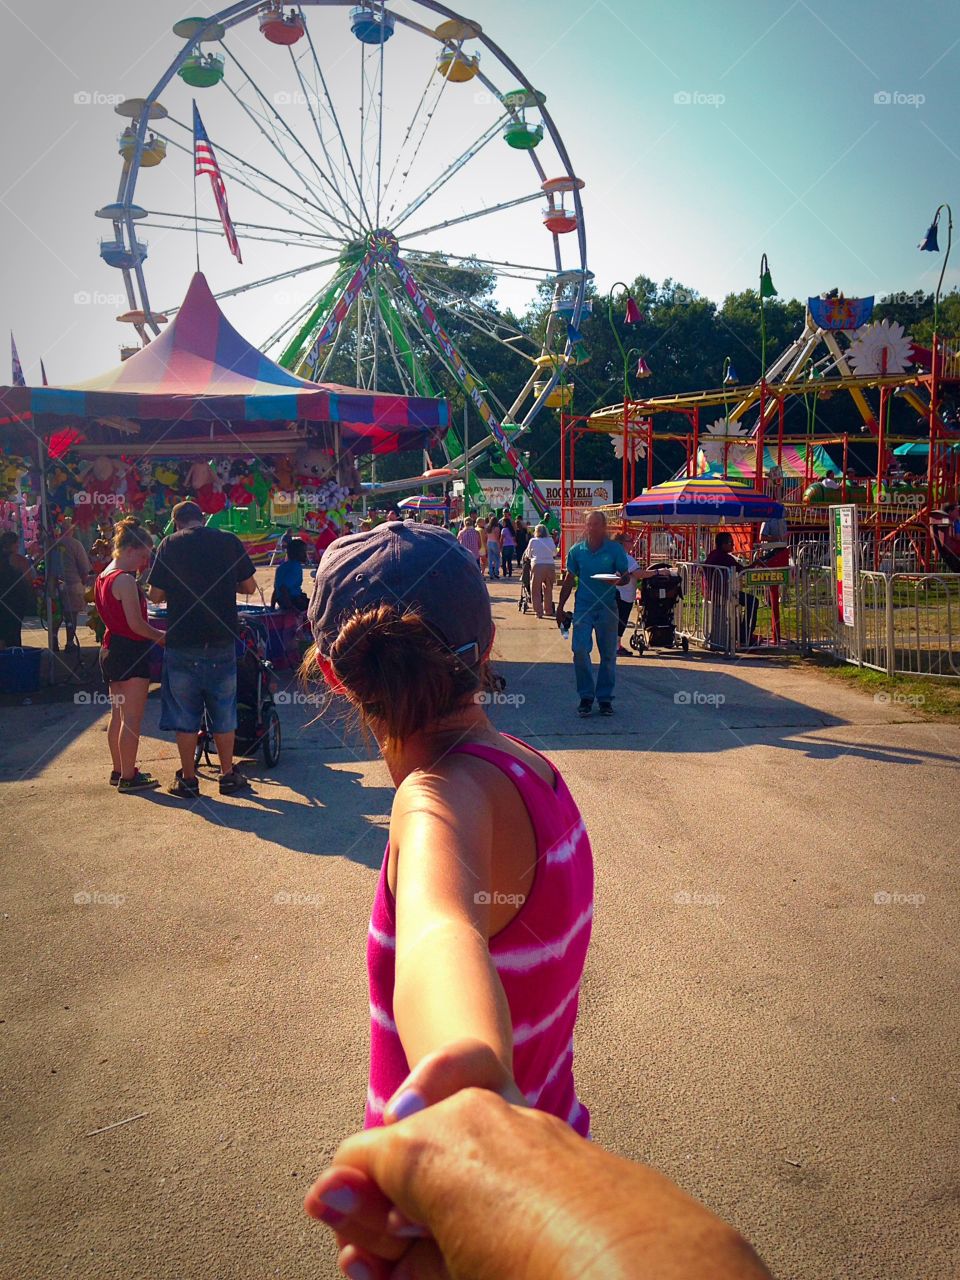 Follow me to the Ferris Wheel. Walking the midway at the county fair - follow me mission